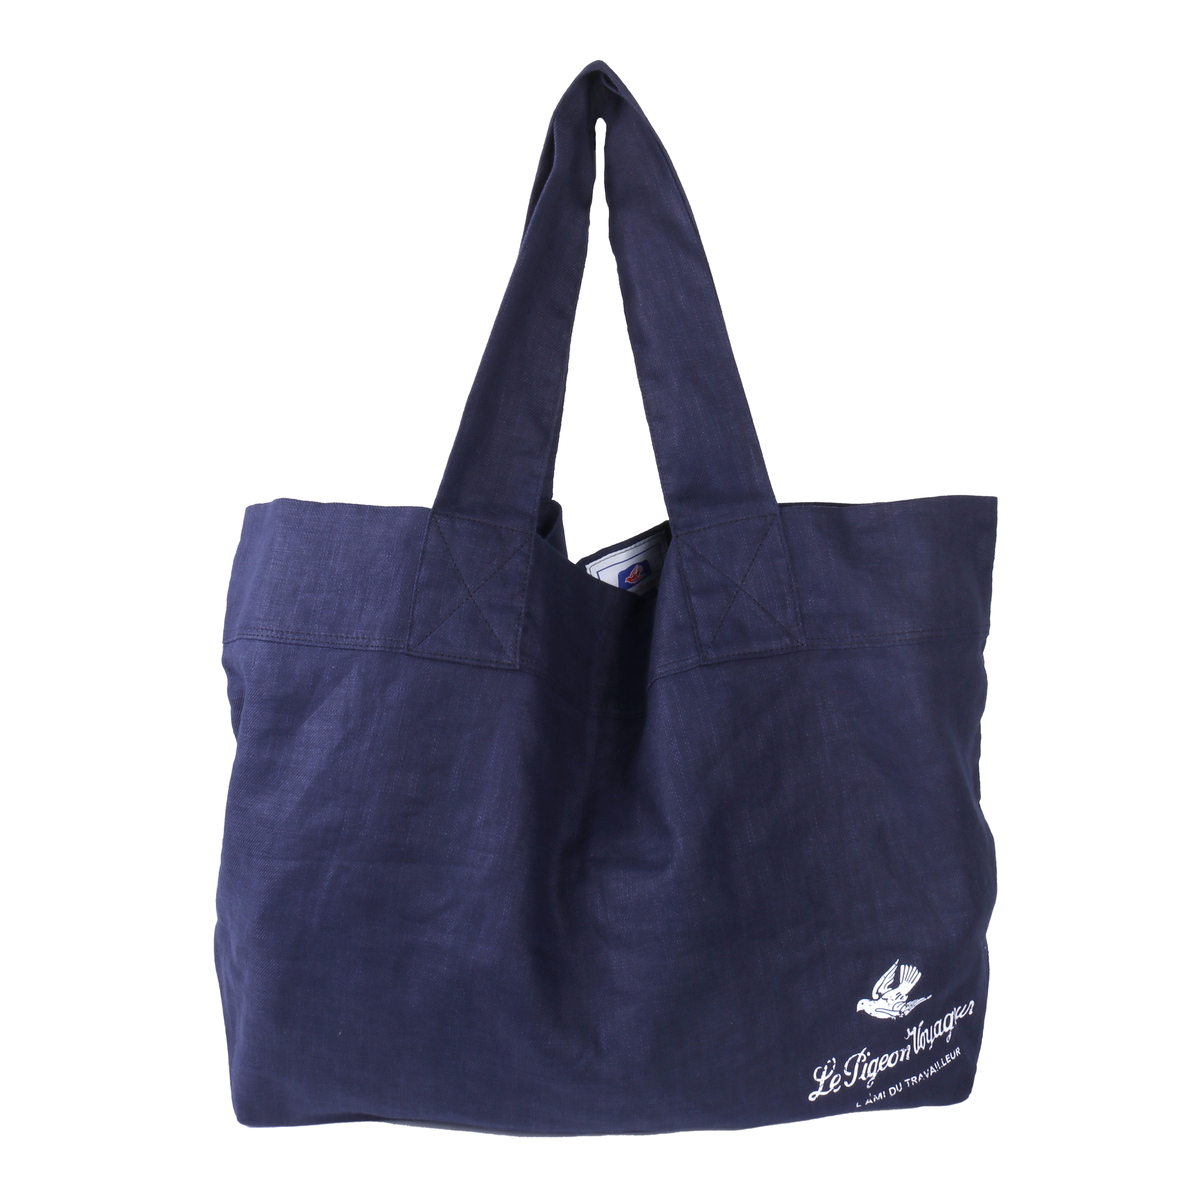 Le Pigeon Voyageur FRENCH LINEN TOTE TOTE BAG トートバッグ リネン ハンドメイド風 ナチュラル プリント  ヴィンテージ ライフスタイル | REPORT_SHOP　楽天市場店